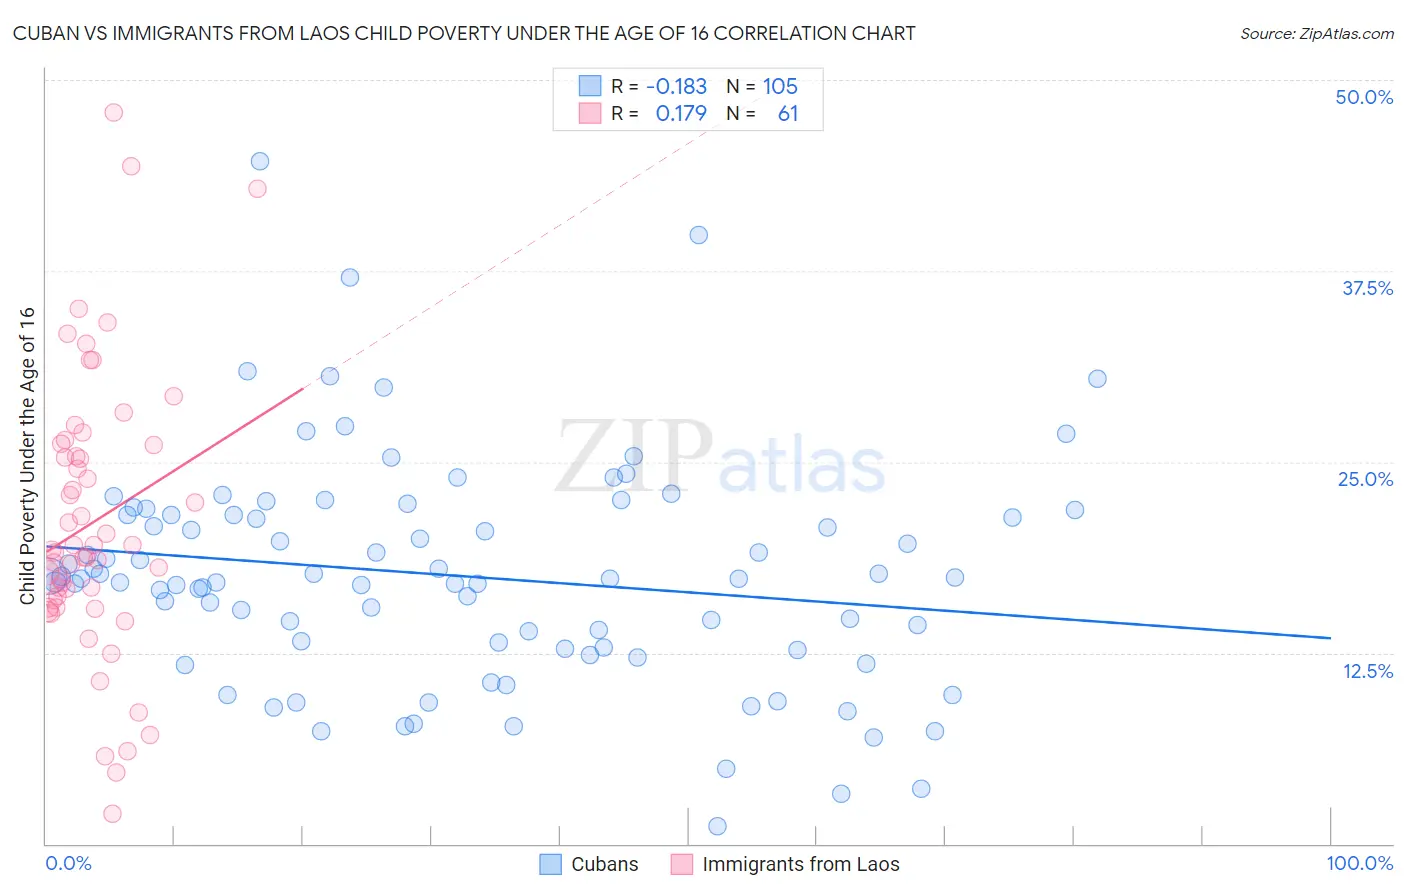 Cuban vs Immigrants from Laos Child Poverty Under the Age of 16